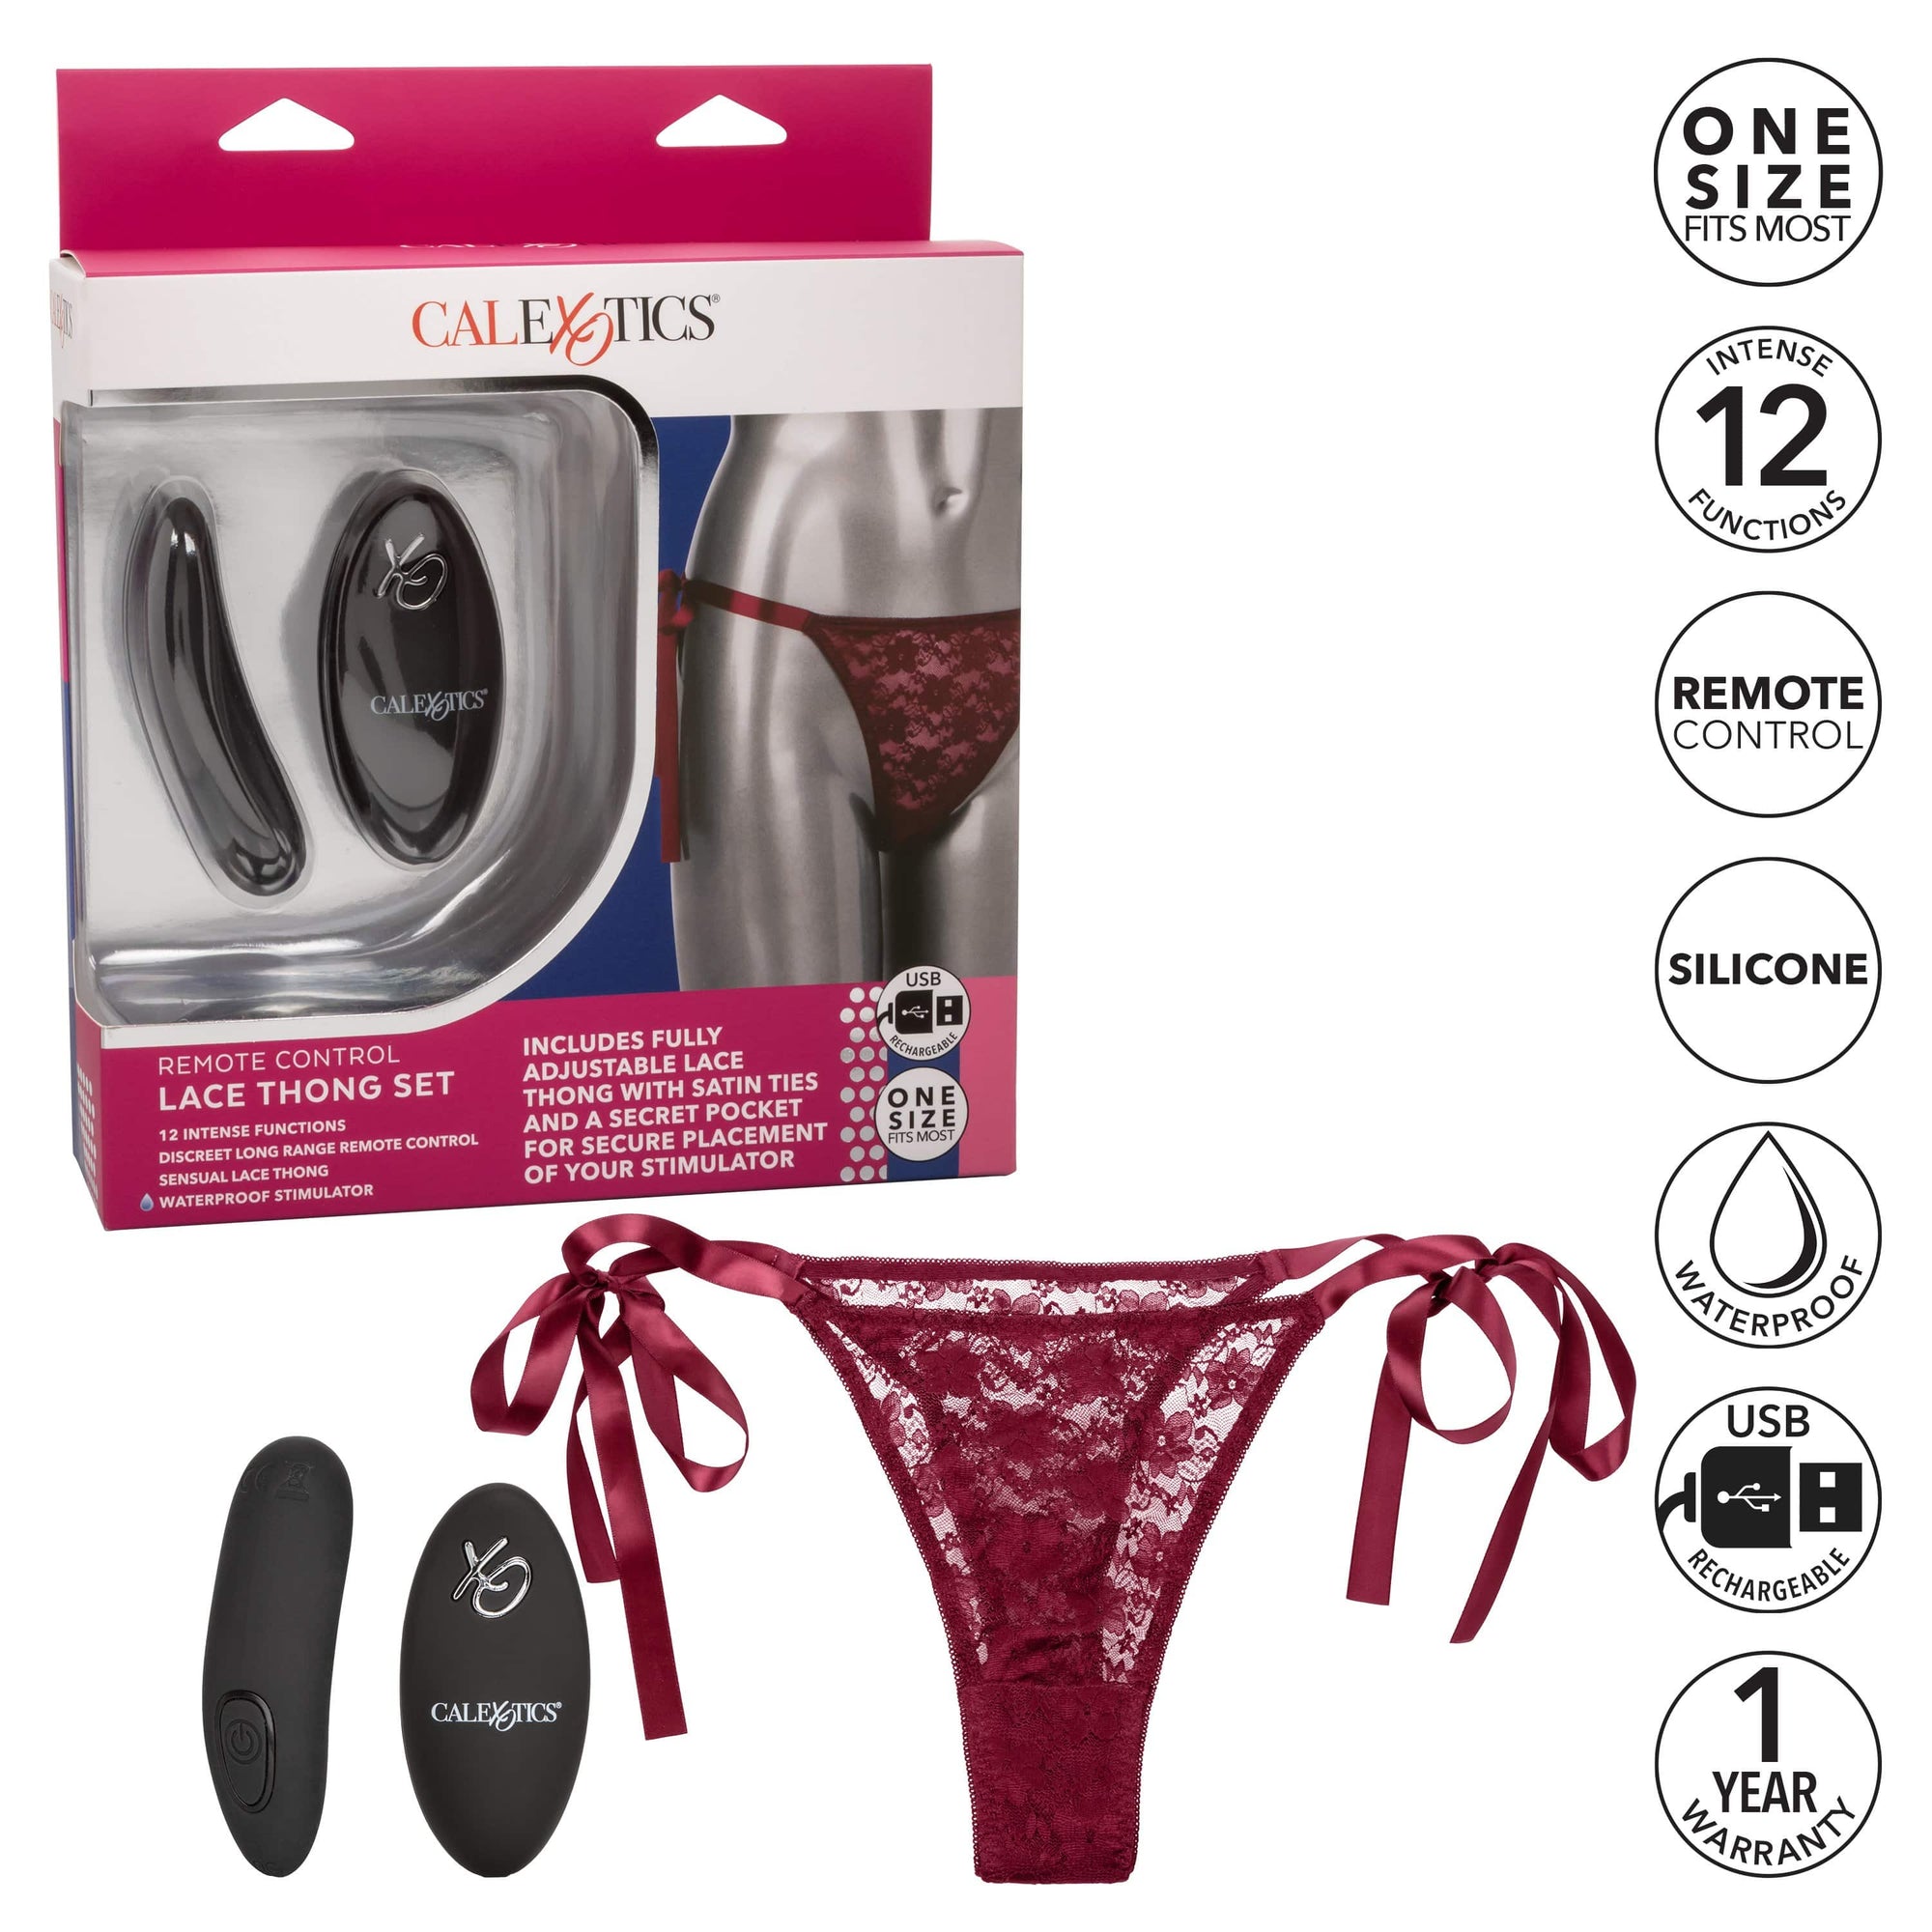 California Exotics - Remote Control Vibrating Lace Thong Set (Burgundy) Panties Massager Remote Control (Vibration) Rechargeable 716770099211 CherryAffairs